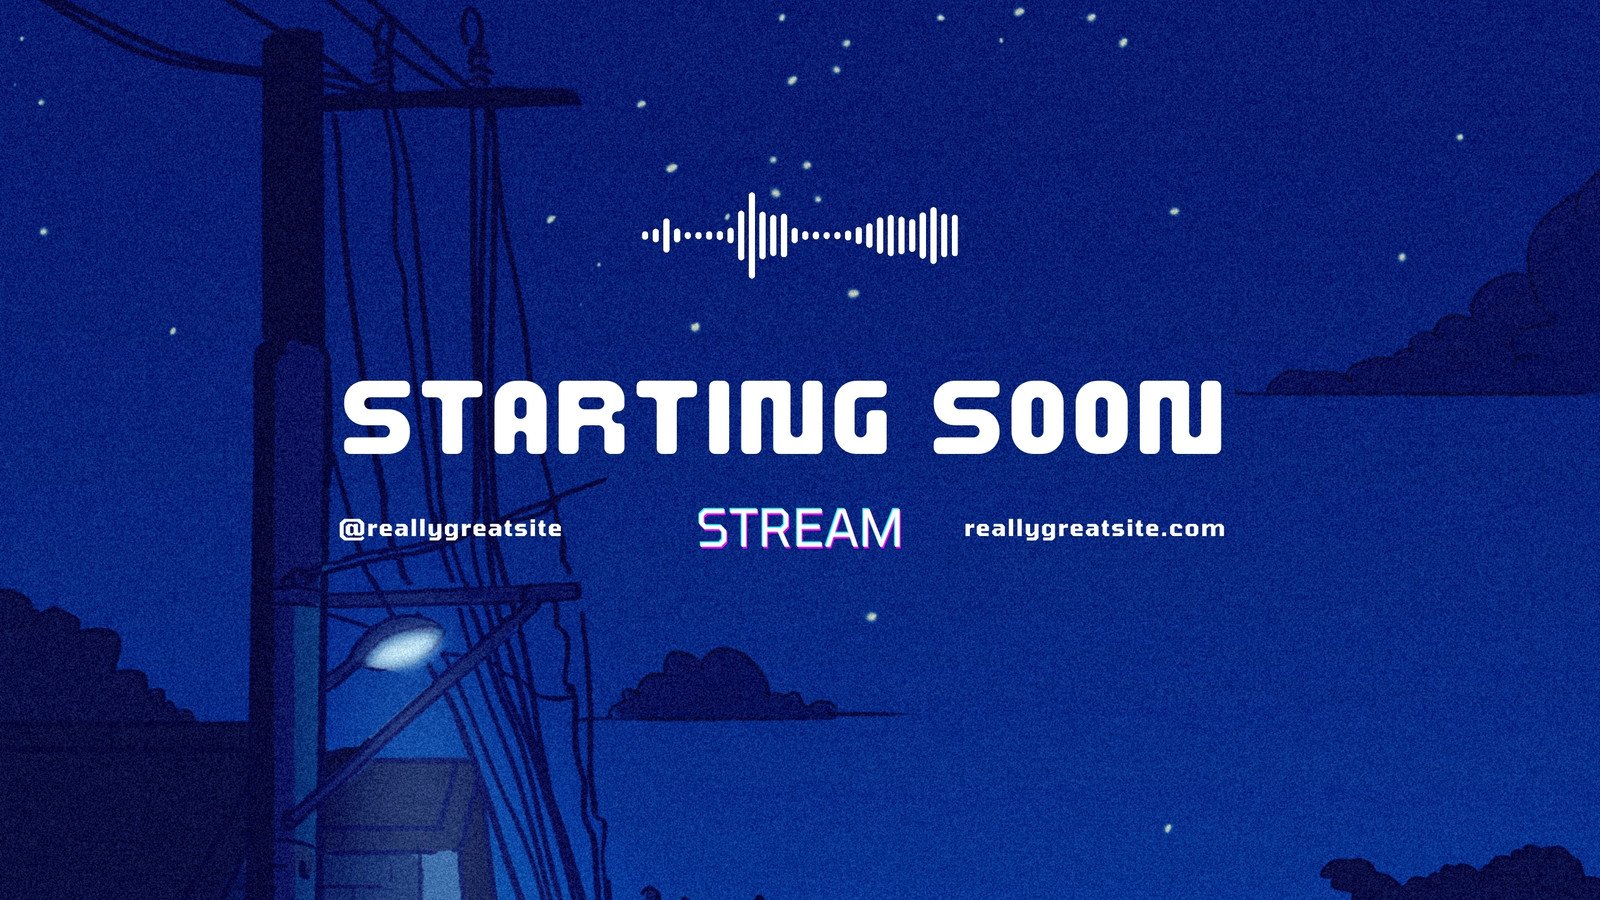 Animated Sweet Night Ingame & Just Chatting Overlay - Twitch -  -  Facebook Gaming - Stream - Cloud - Pastel - Cute - Moon - Star